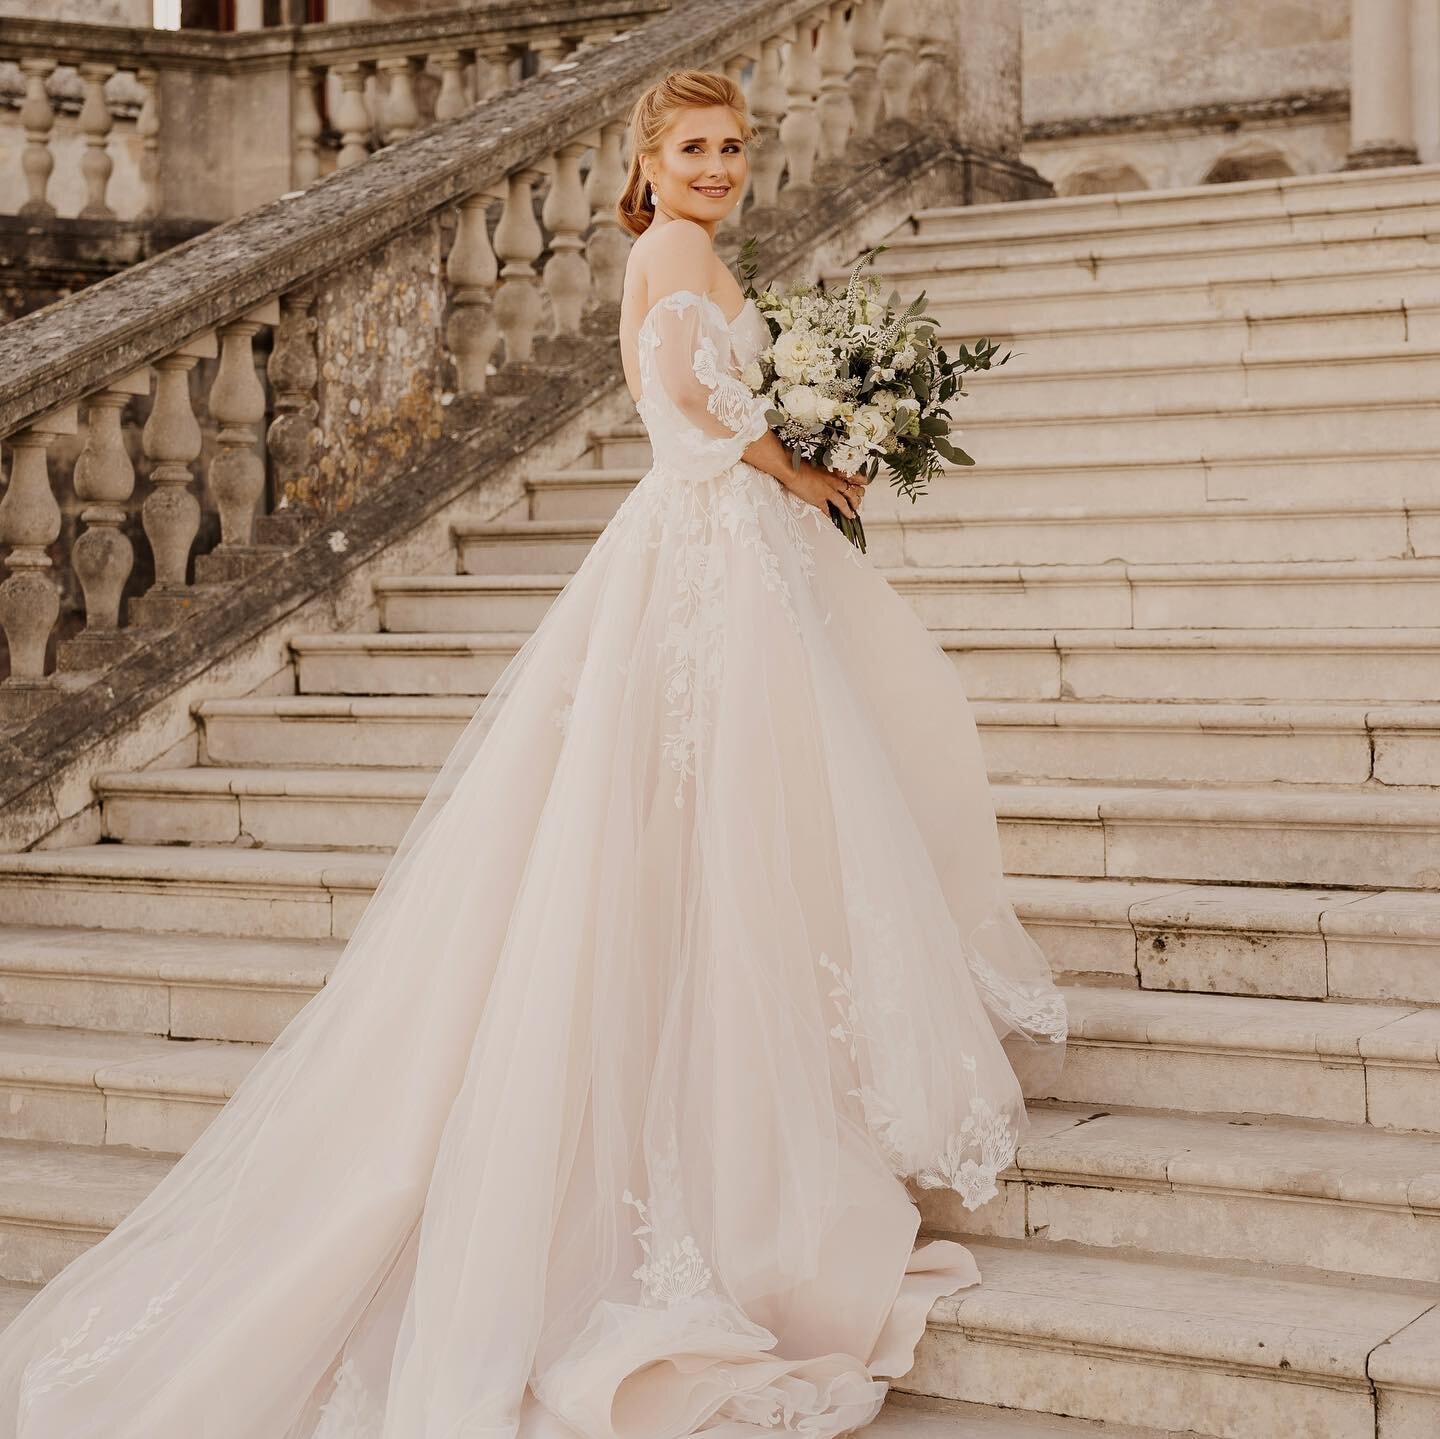 Ohhhh. My. Days! Does it get anyyy better! Lulworth Castle providing the beautiful background to a day styled to perfection with this bombshell casually bossing being a bride! I am SO happy to share some snippets from Hannah and George&rsquo;s incred